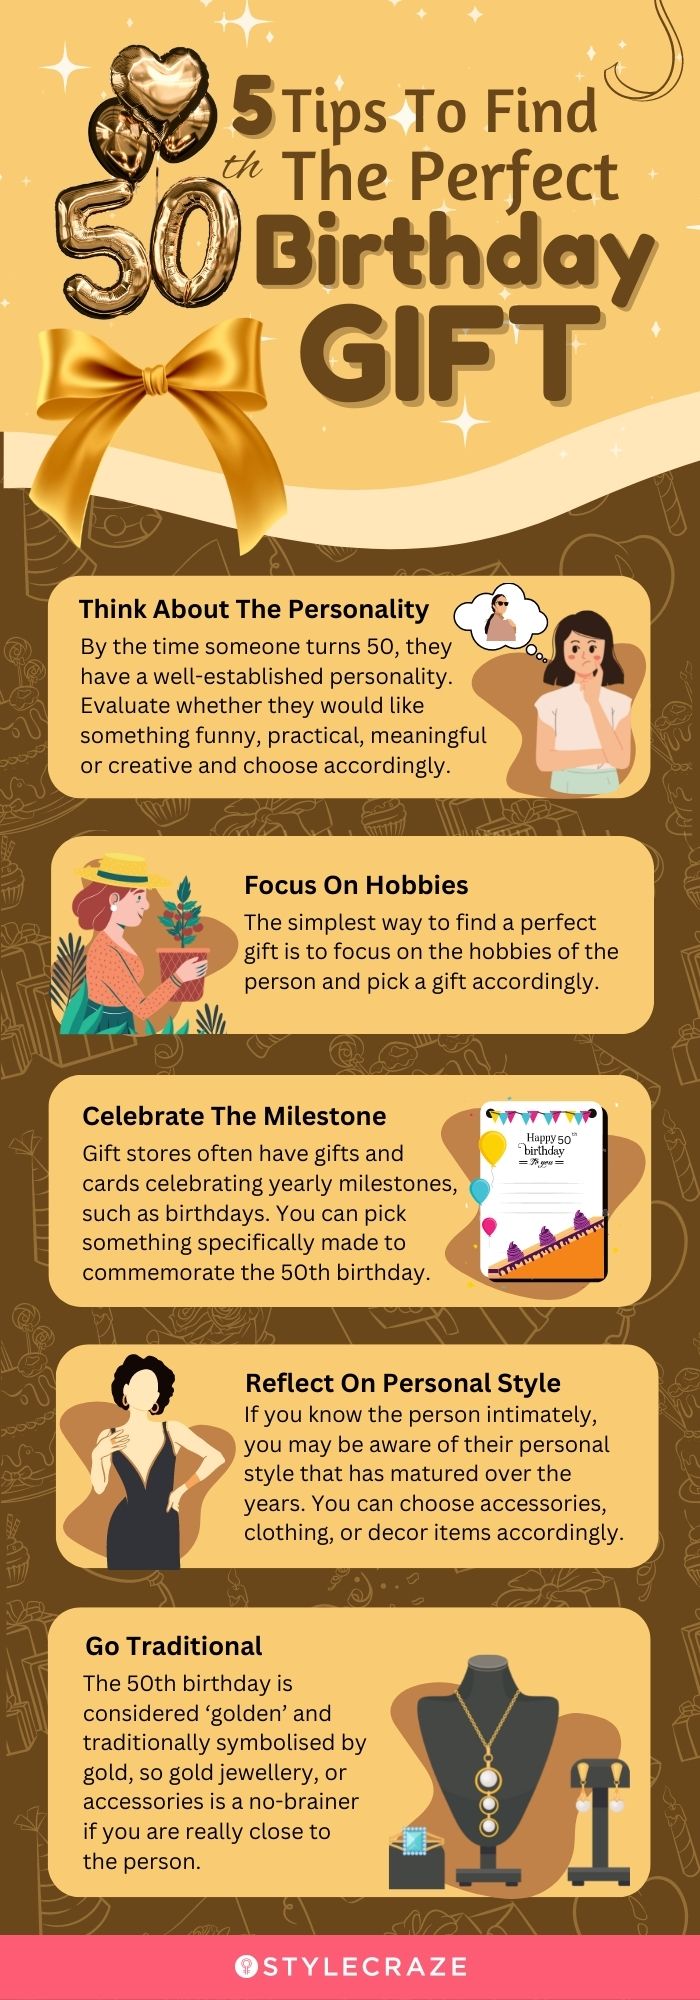 5 tips to find the perfect 50th birthday gift (infographic)